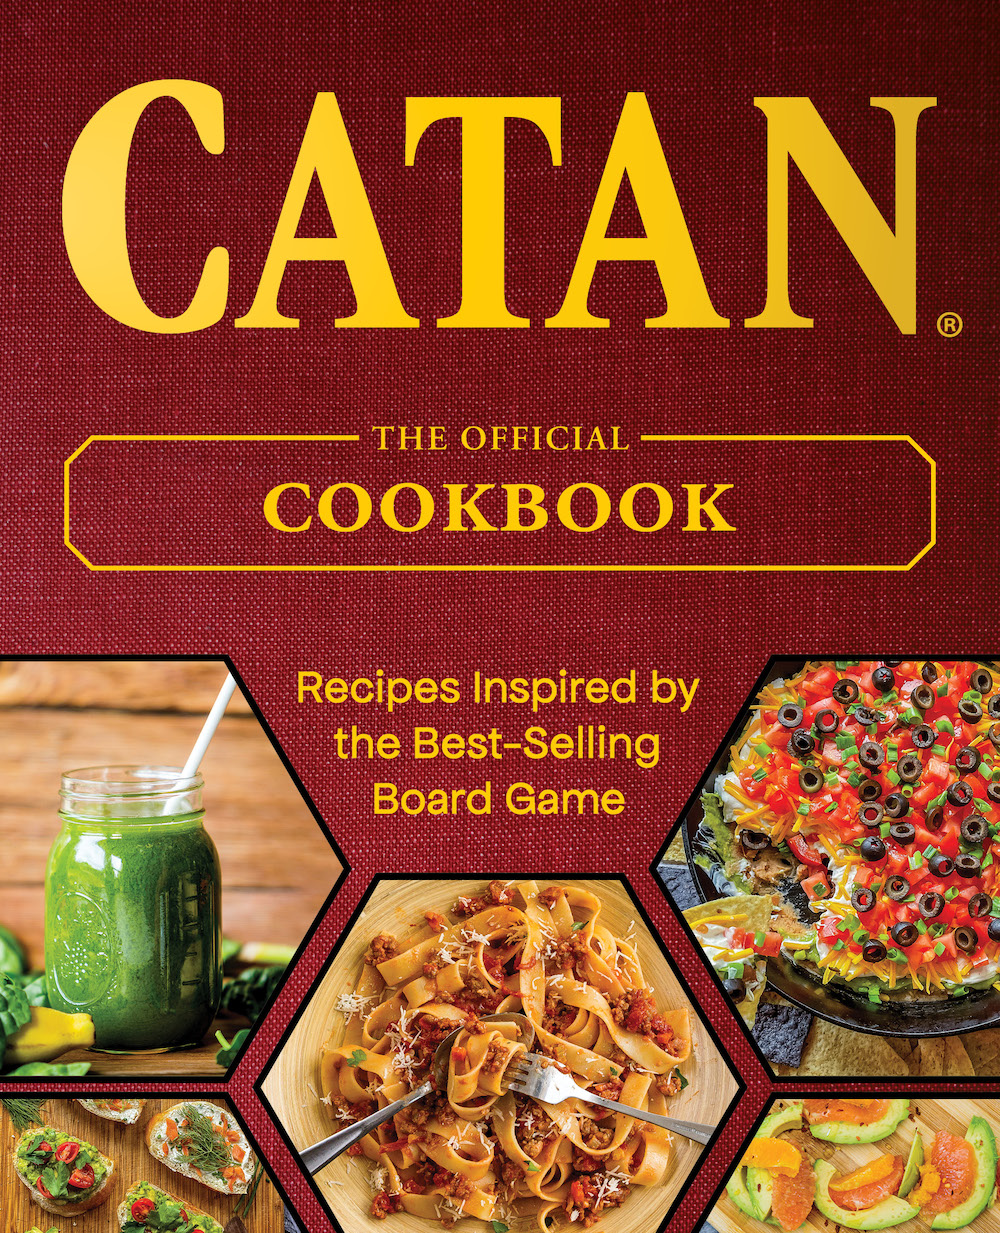 Catan The Official Cookbook